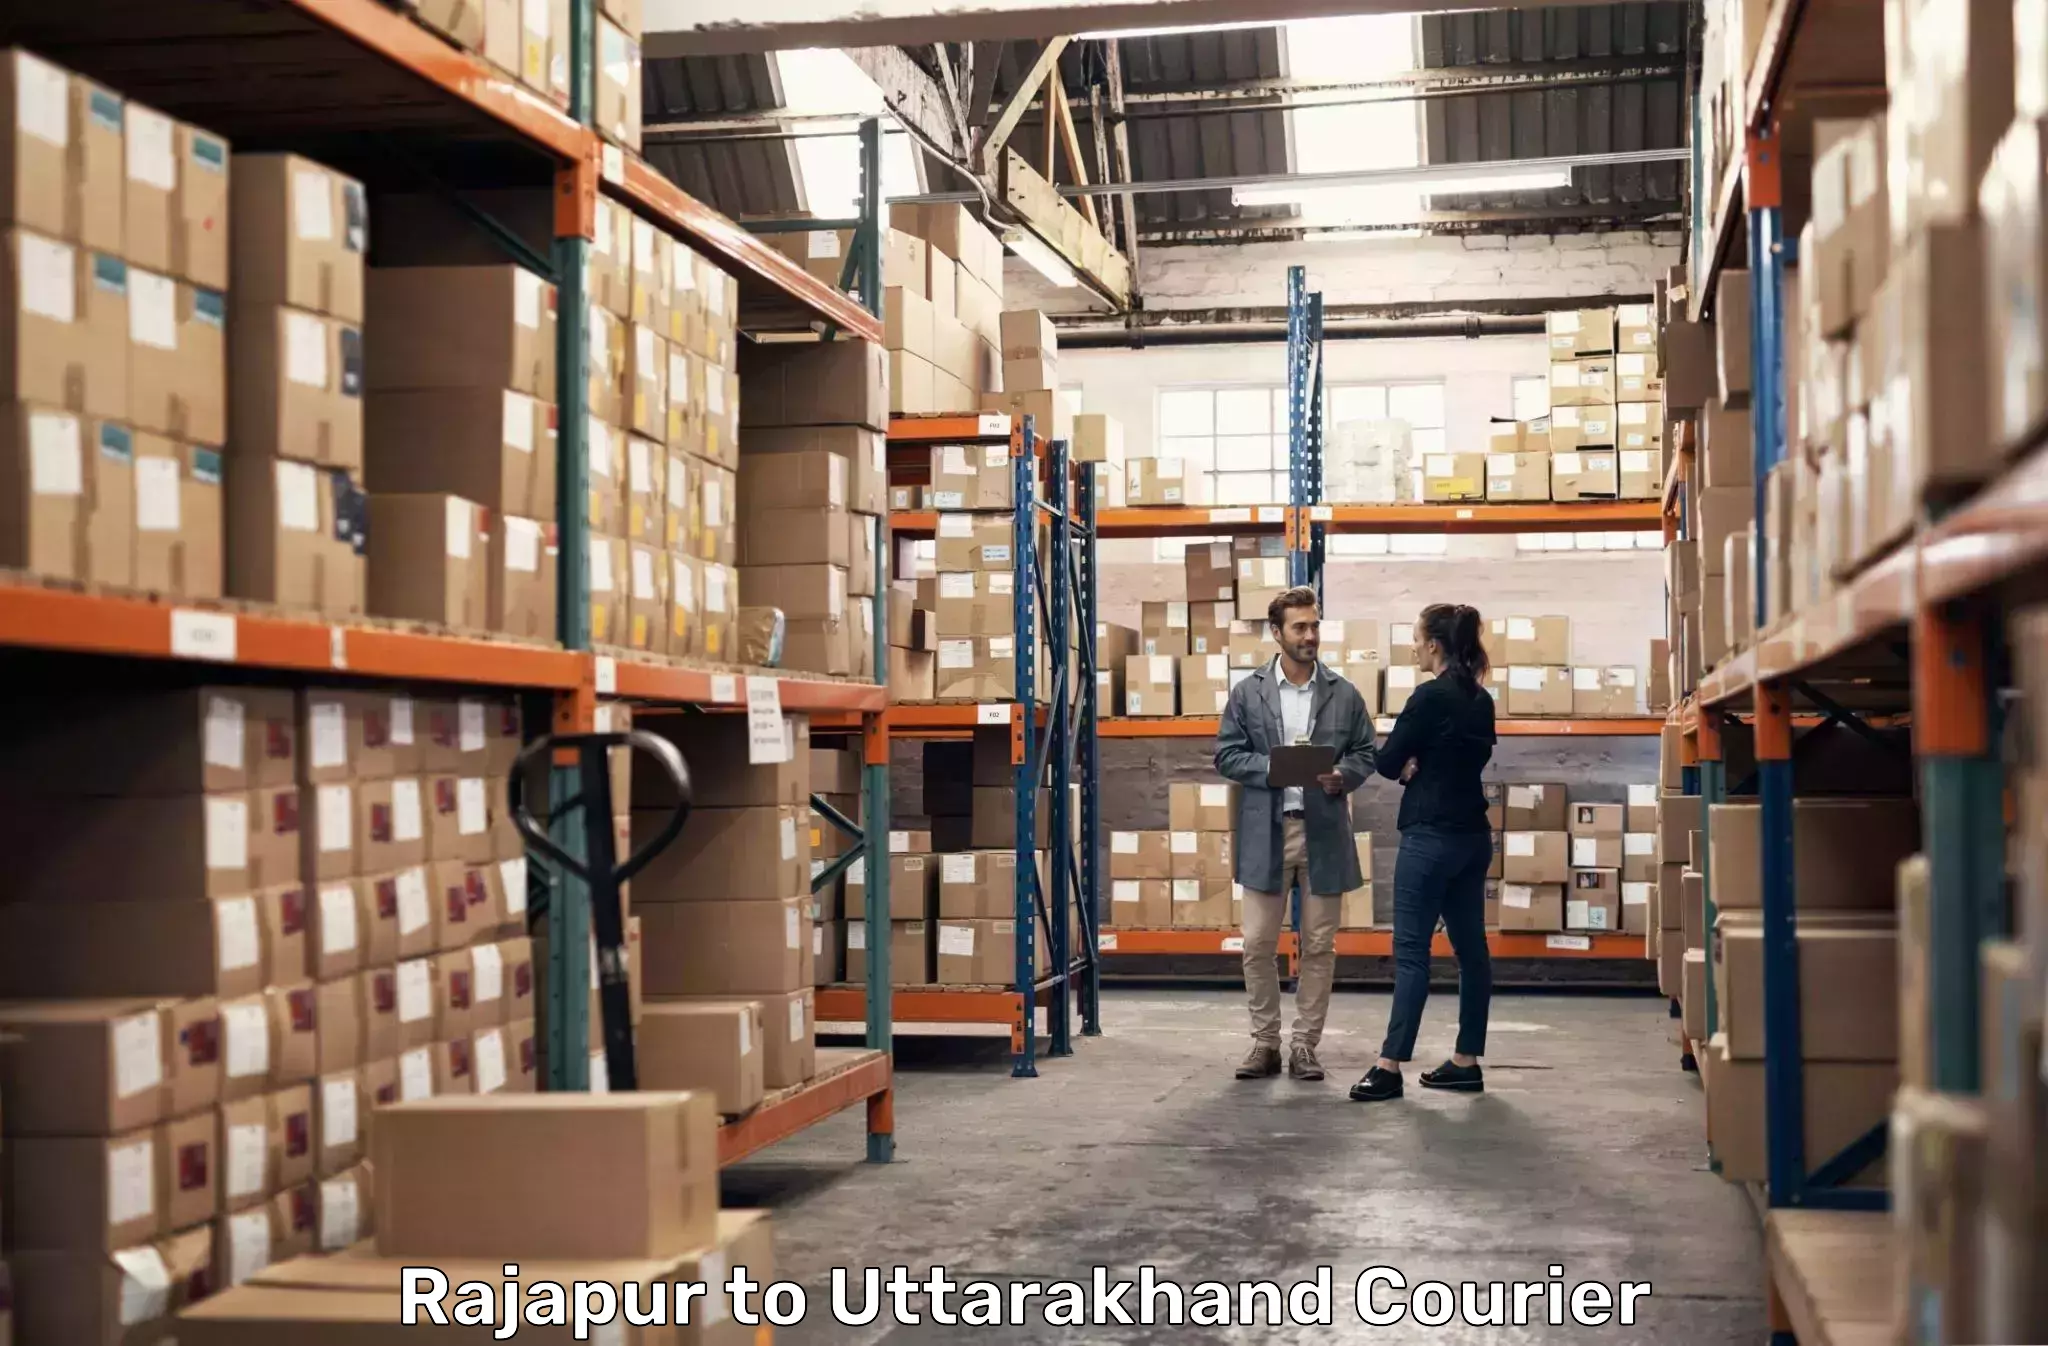 Global shipping networks Rajapur to Rudrapur